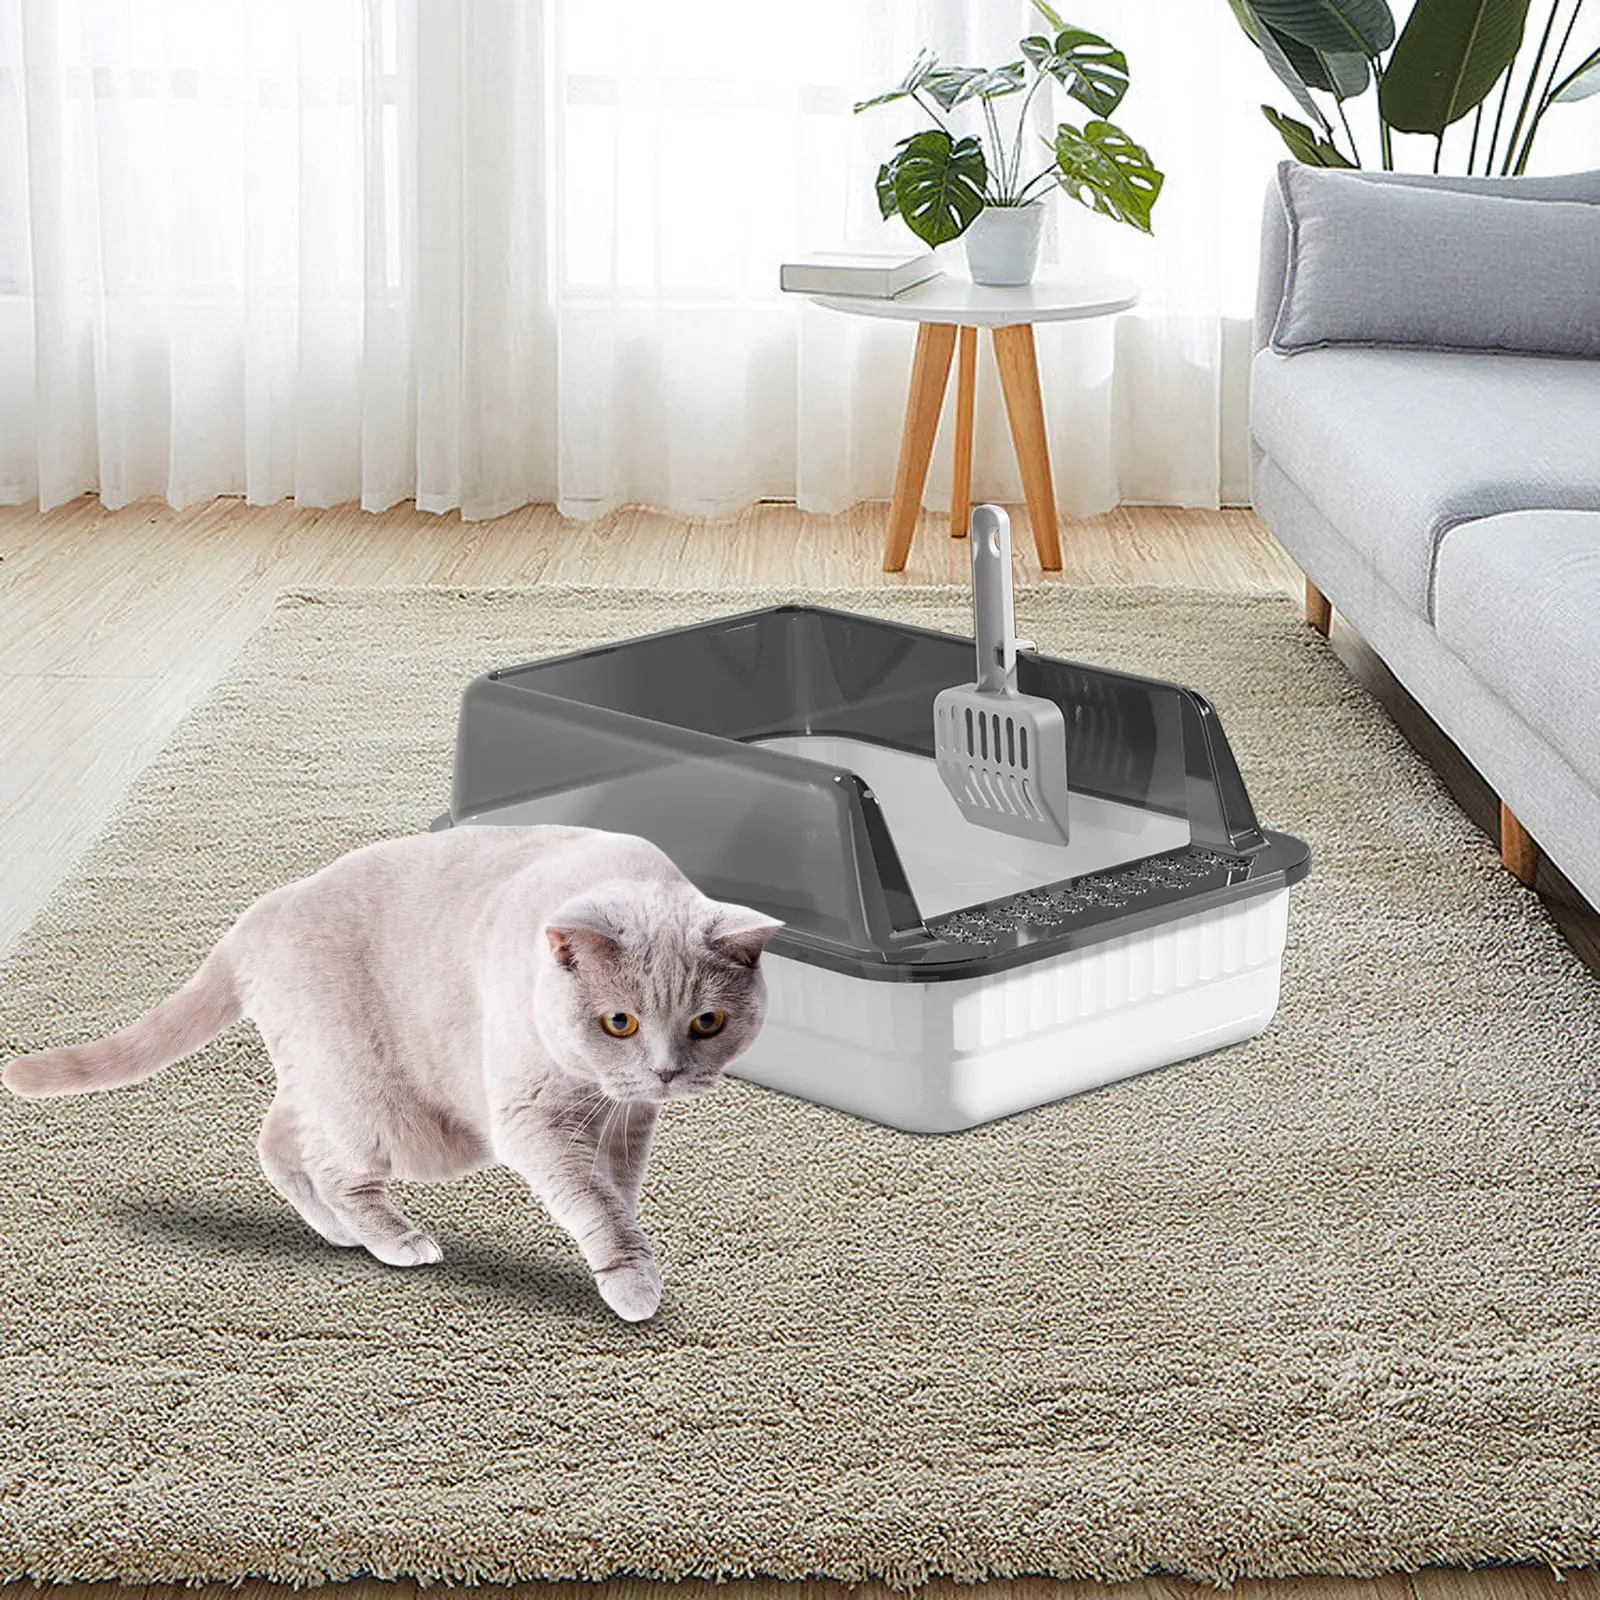 Cat Litter Box Tray Toilet Set High Sides Semi Enclosed Durable Simple Structure 18L Large Capacity Detachable for Small Pets